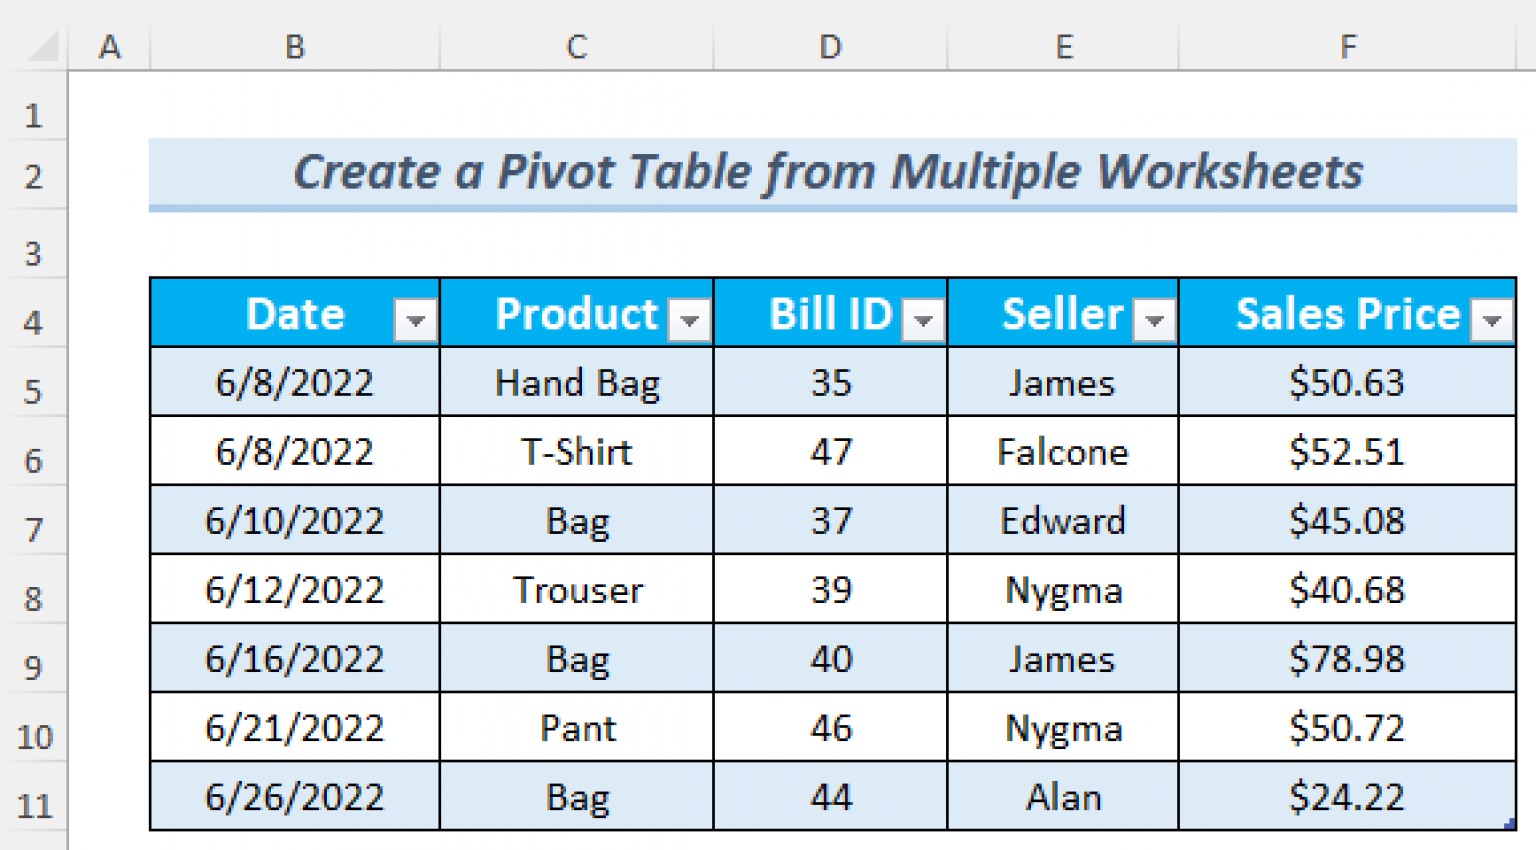 How Do I Create A Pivot Table From Multiple Worksheets